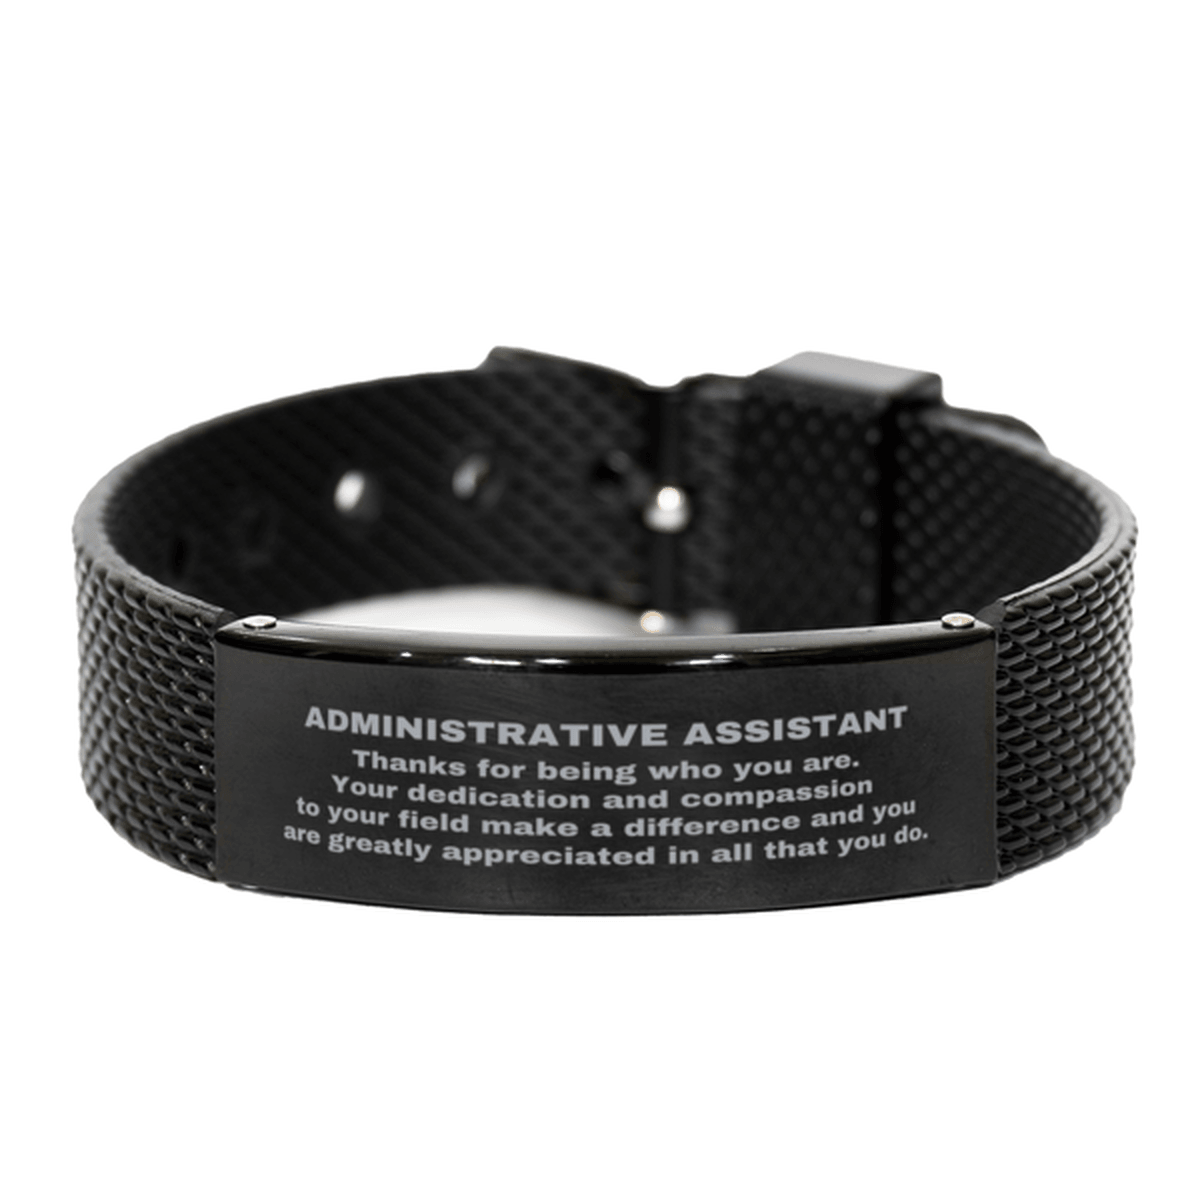 Administrative Assistant Black Shark Mesh Stainless Steel Engraved Bracelet - Thanks for being who you are - Birthday Christmas Jewelry Gifts Coworkers Colleague Boss - Mallard Moon Gift Shop